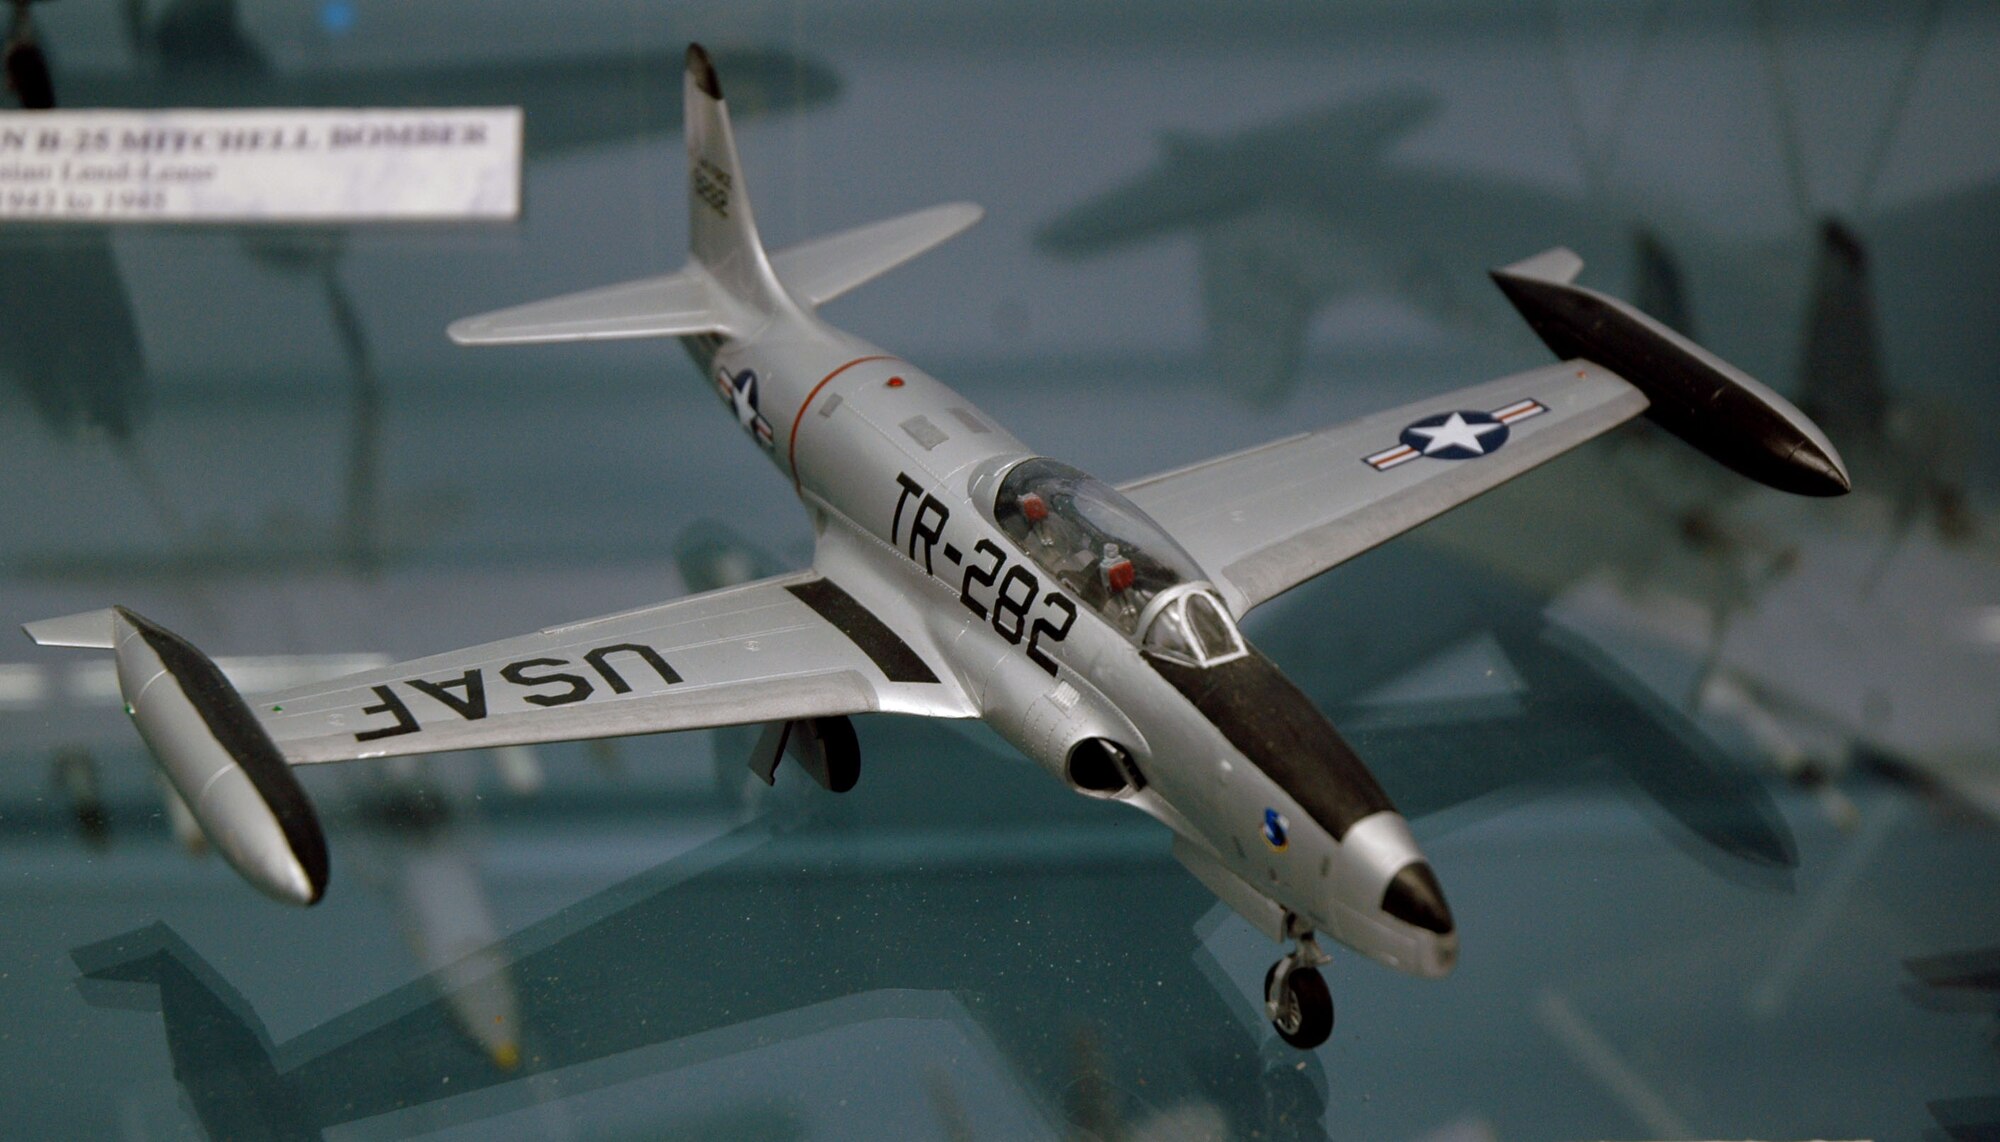 A model of a T-33 "Shooting Star" is one of many model aircraft in the large collection on display at the Malmstrom Museum. T-33 aircraft were assigned to Malmstrom from 1953 to 1972. The museum is open Monday to Friday from 10 a.m. to 4 p.m. (U.S. Air Force photo/Airman 1st Class Dillon White)